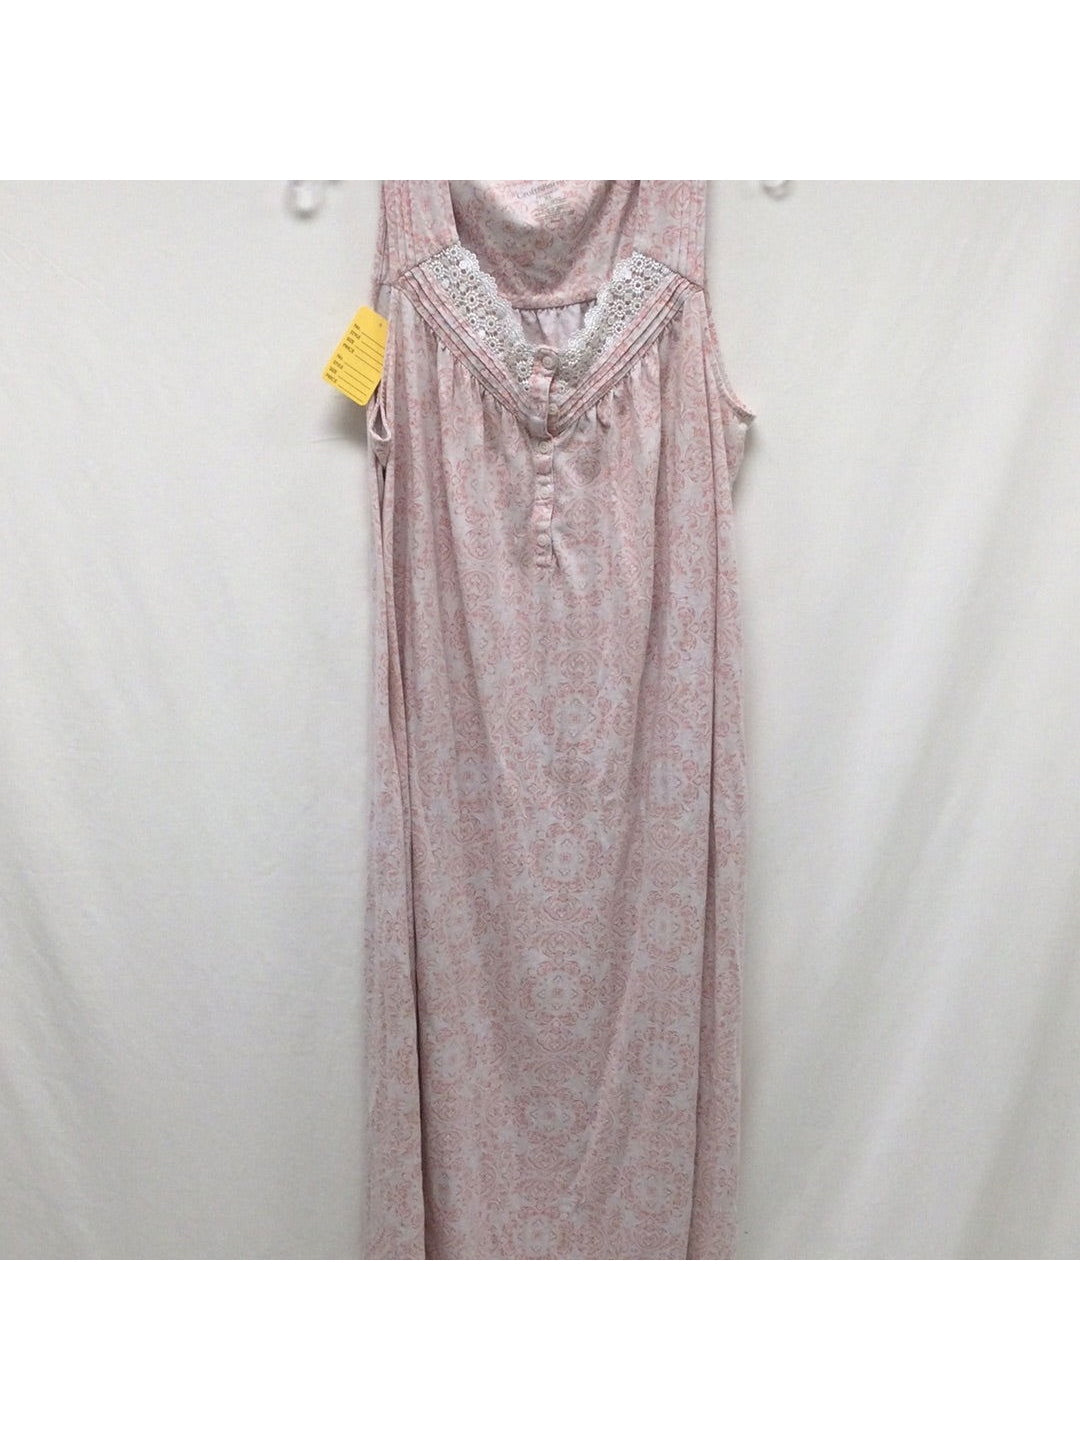 Croft & Barrow Intimates Ladies XL Rose Pink Nightgown - The Kennedy Collective Thrift - 